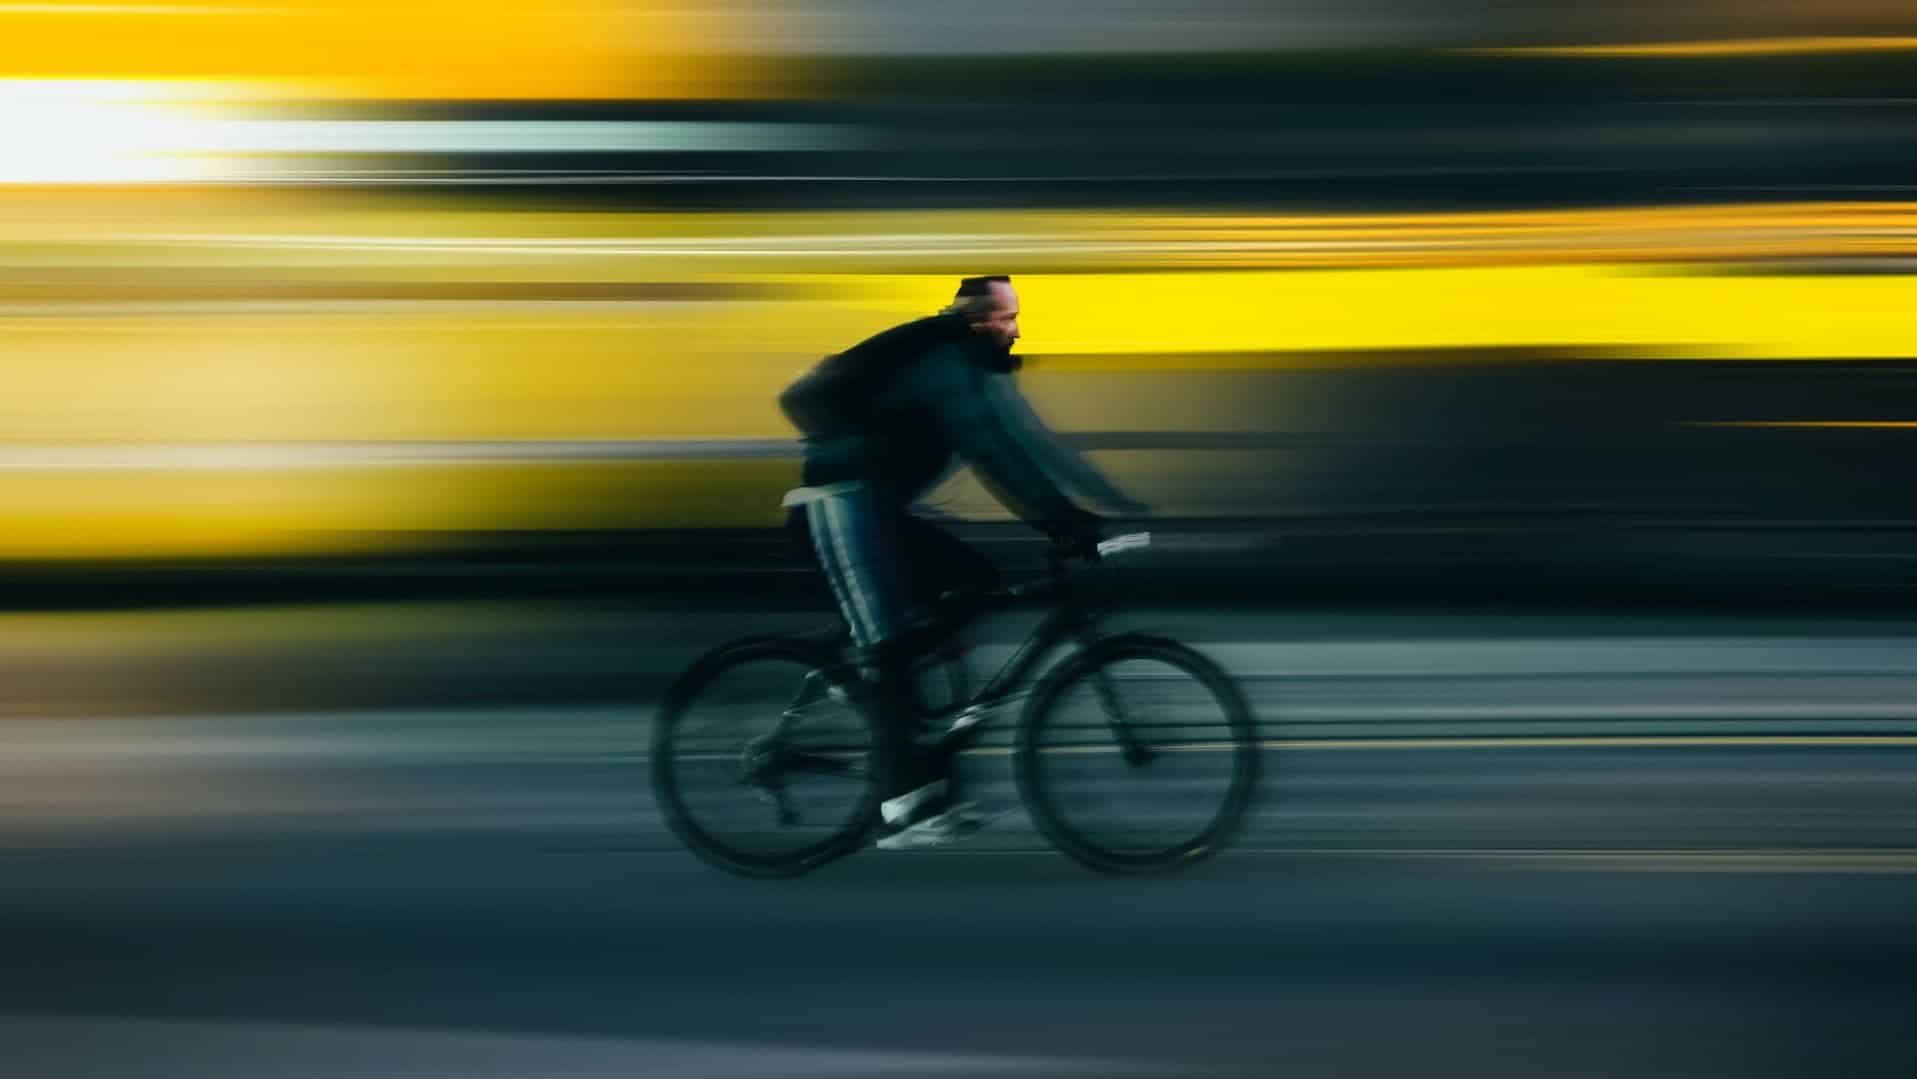 A person riding a bicycle  very fast, which represents going too fast as a founder